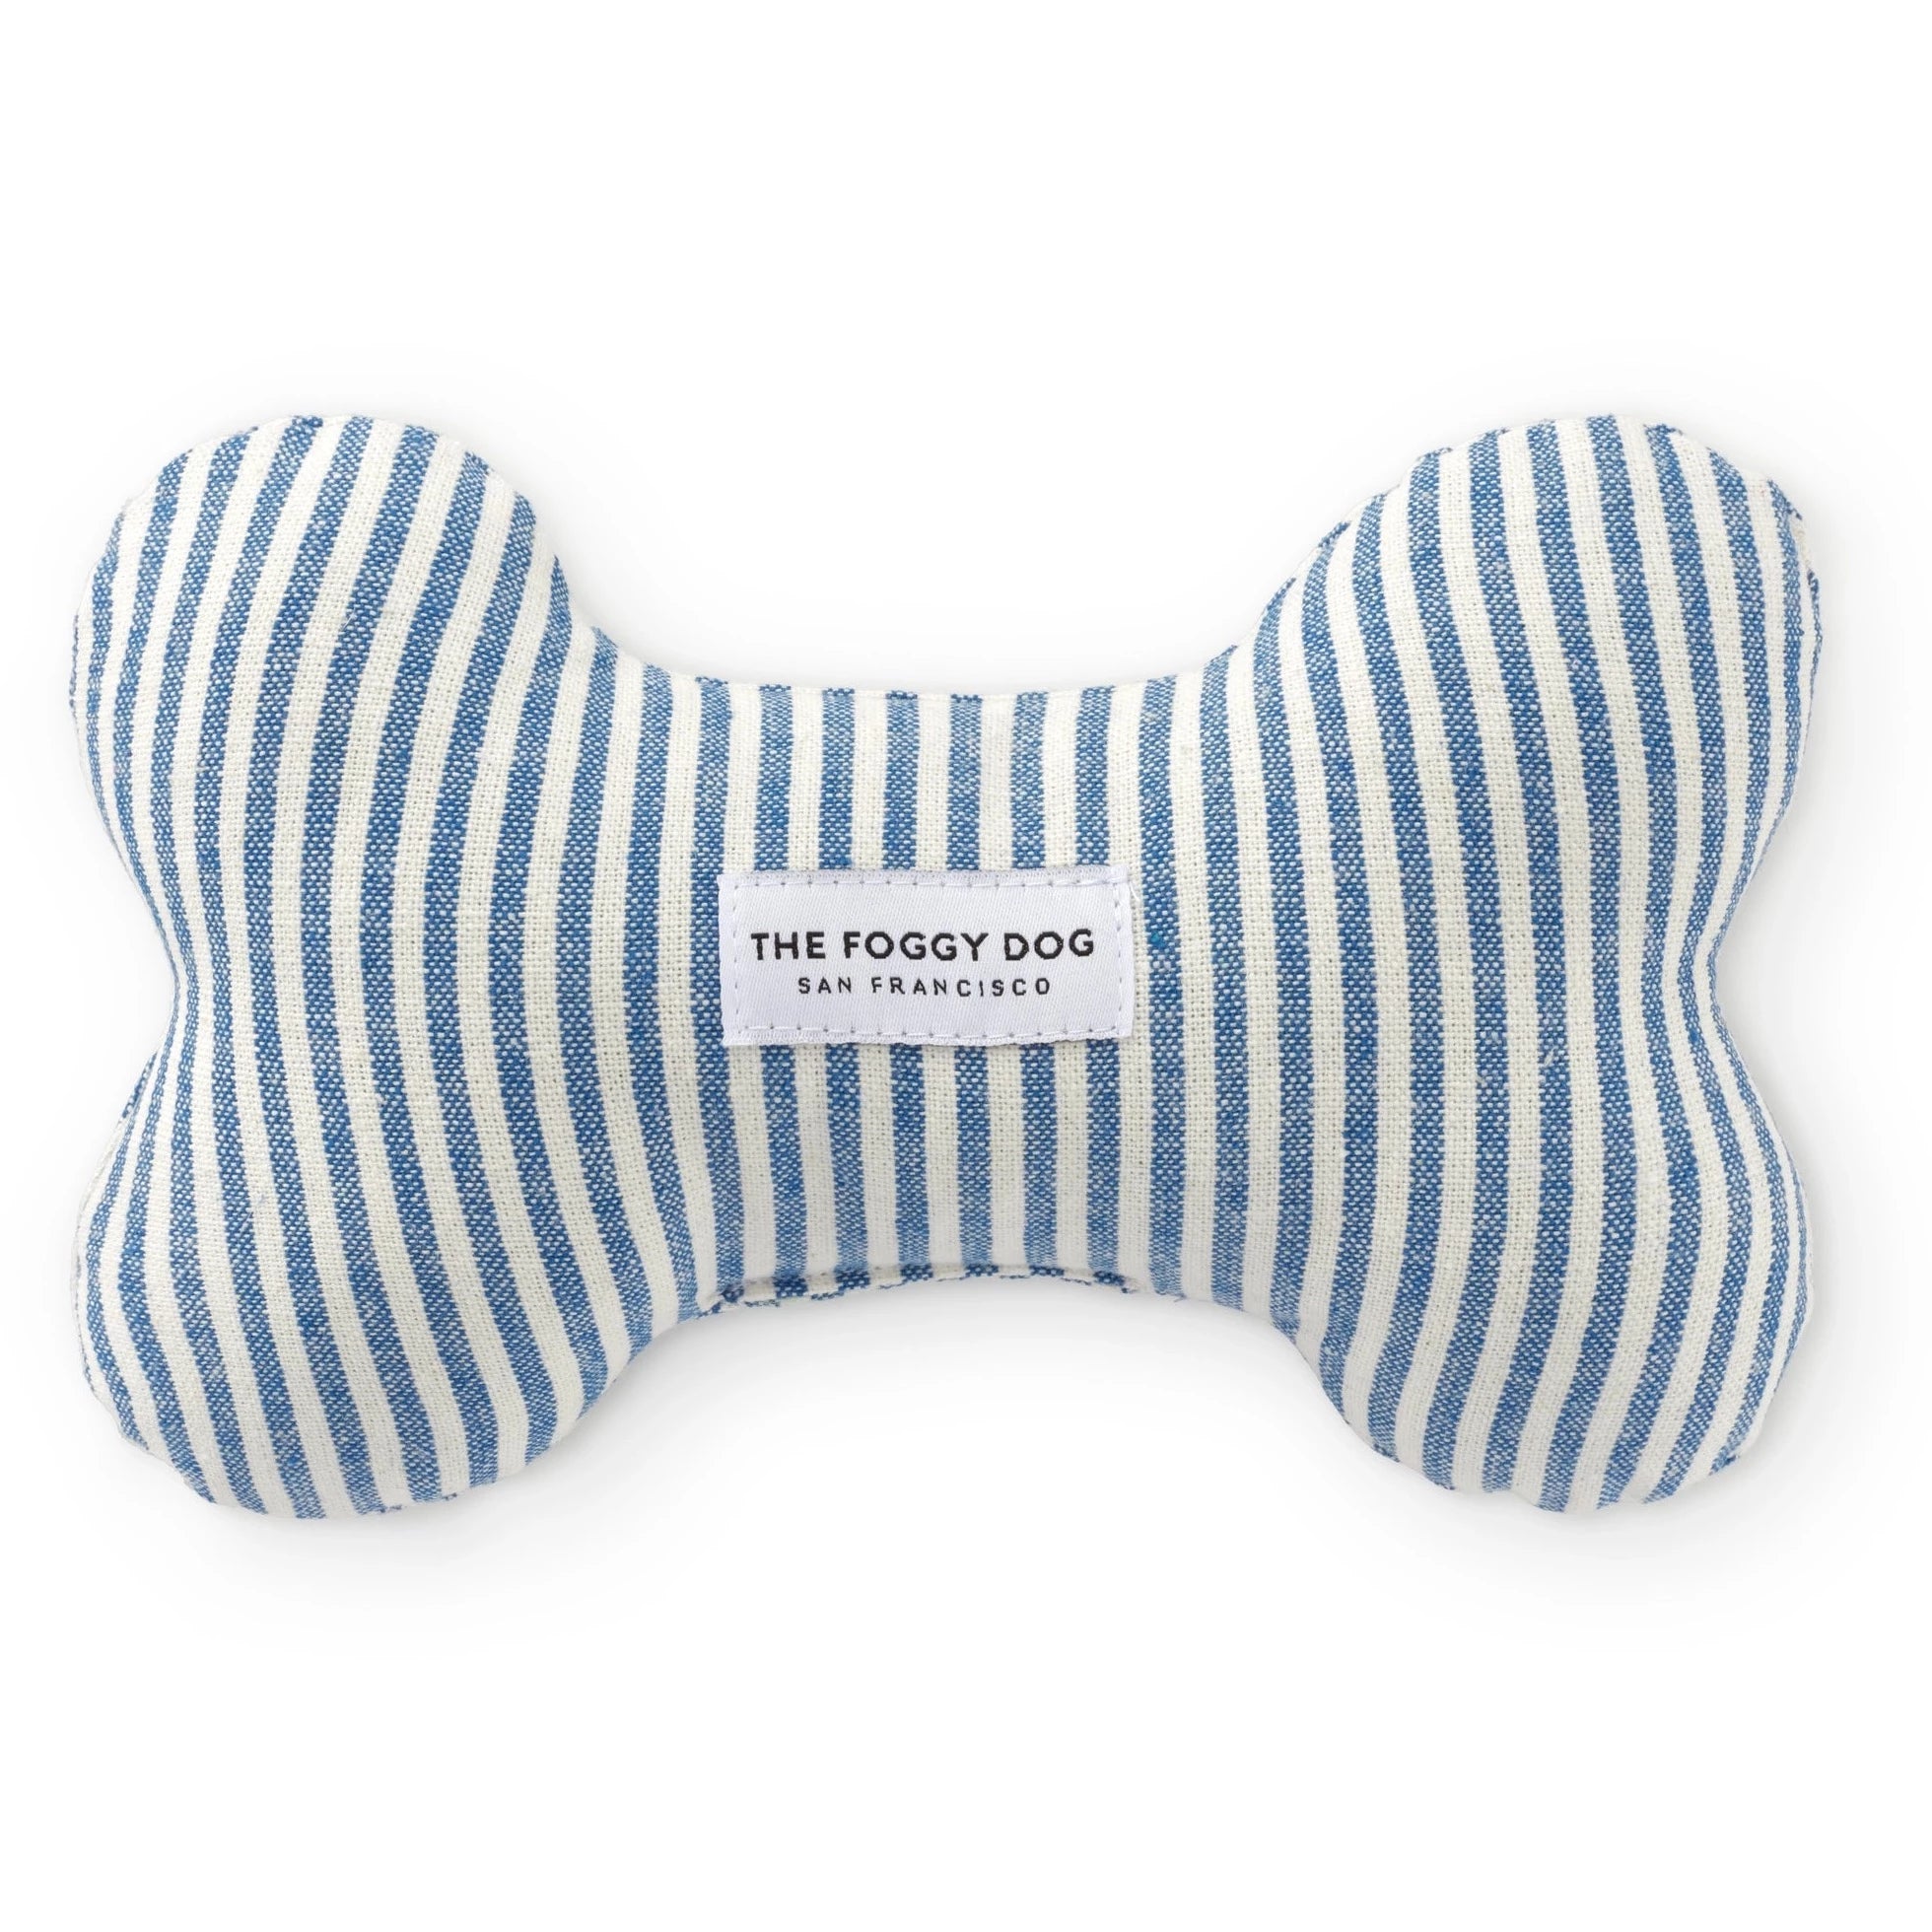 blue and white striped dog squeaky bone shaped toy. has white logo tag in the center with black text